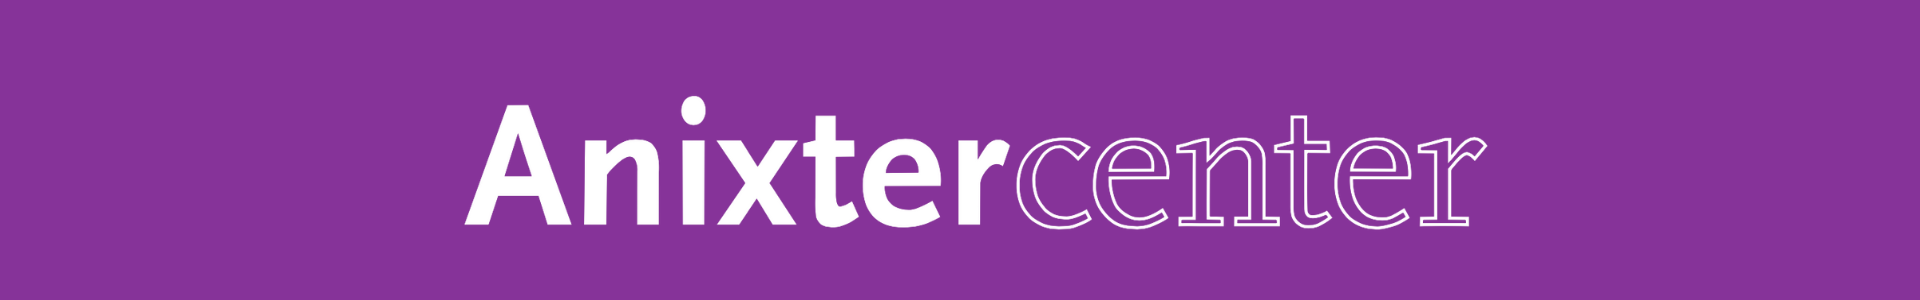 A banner image of Anixter's logo with a purple background